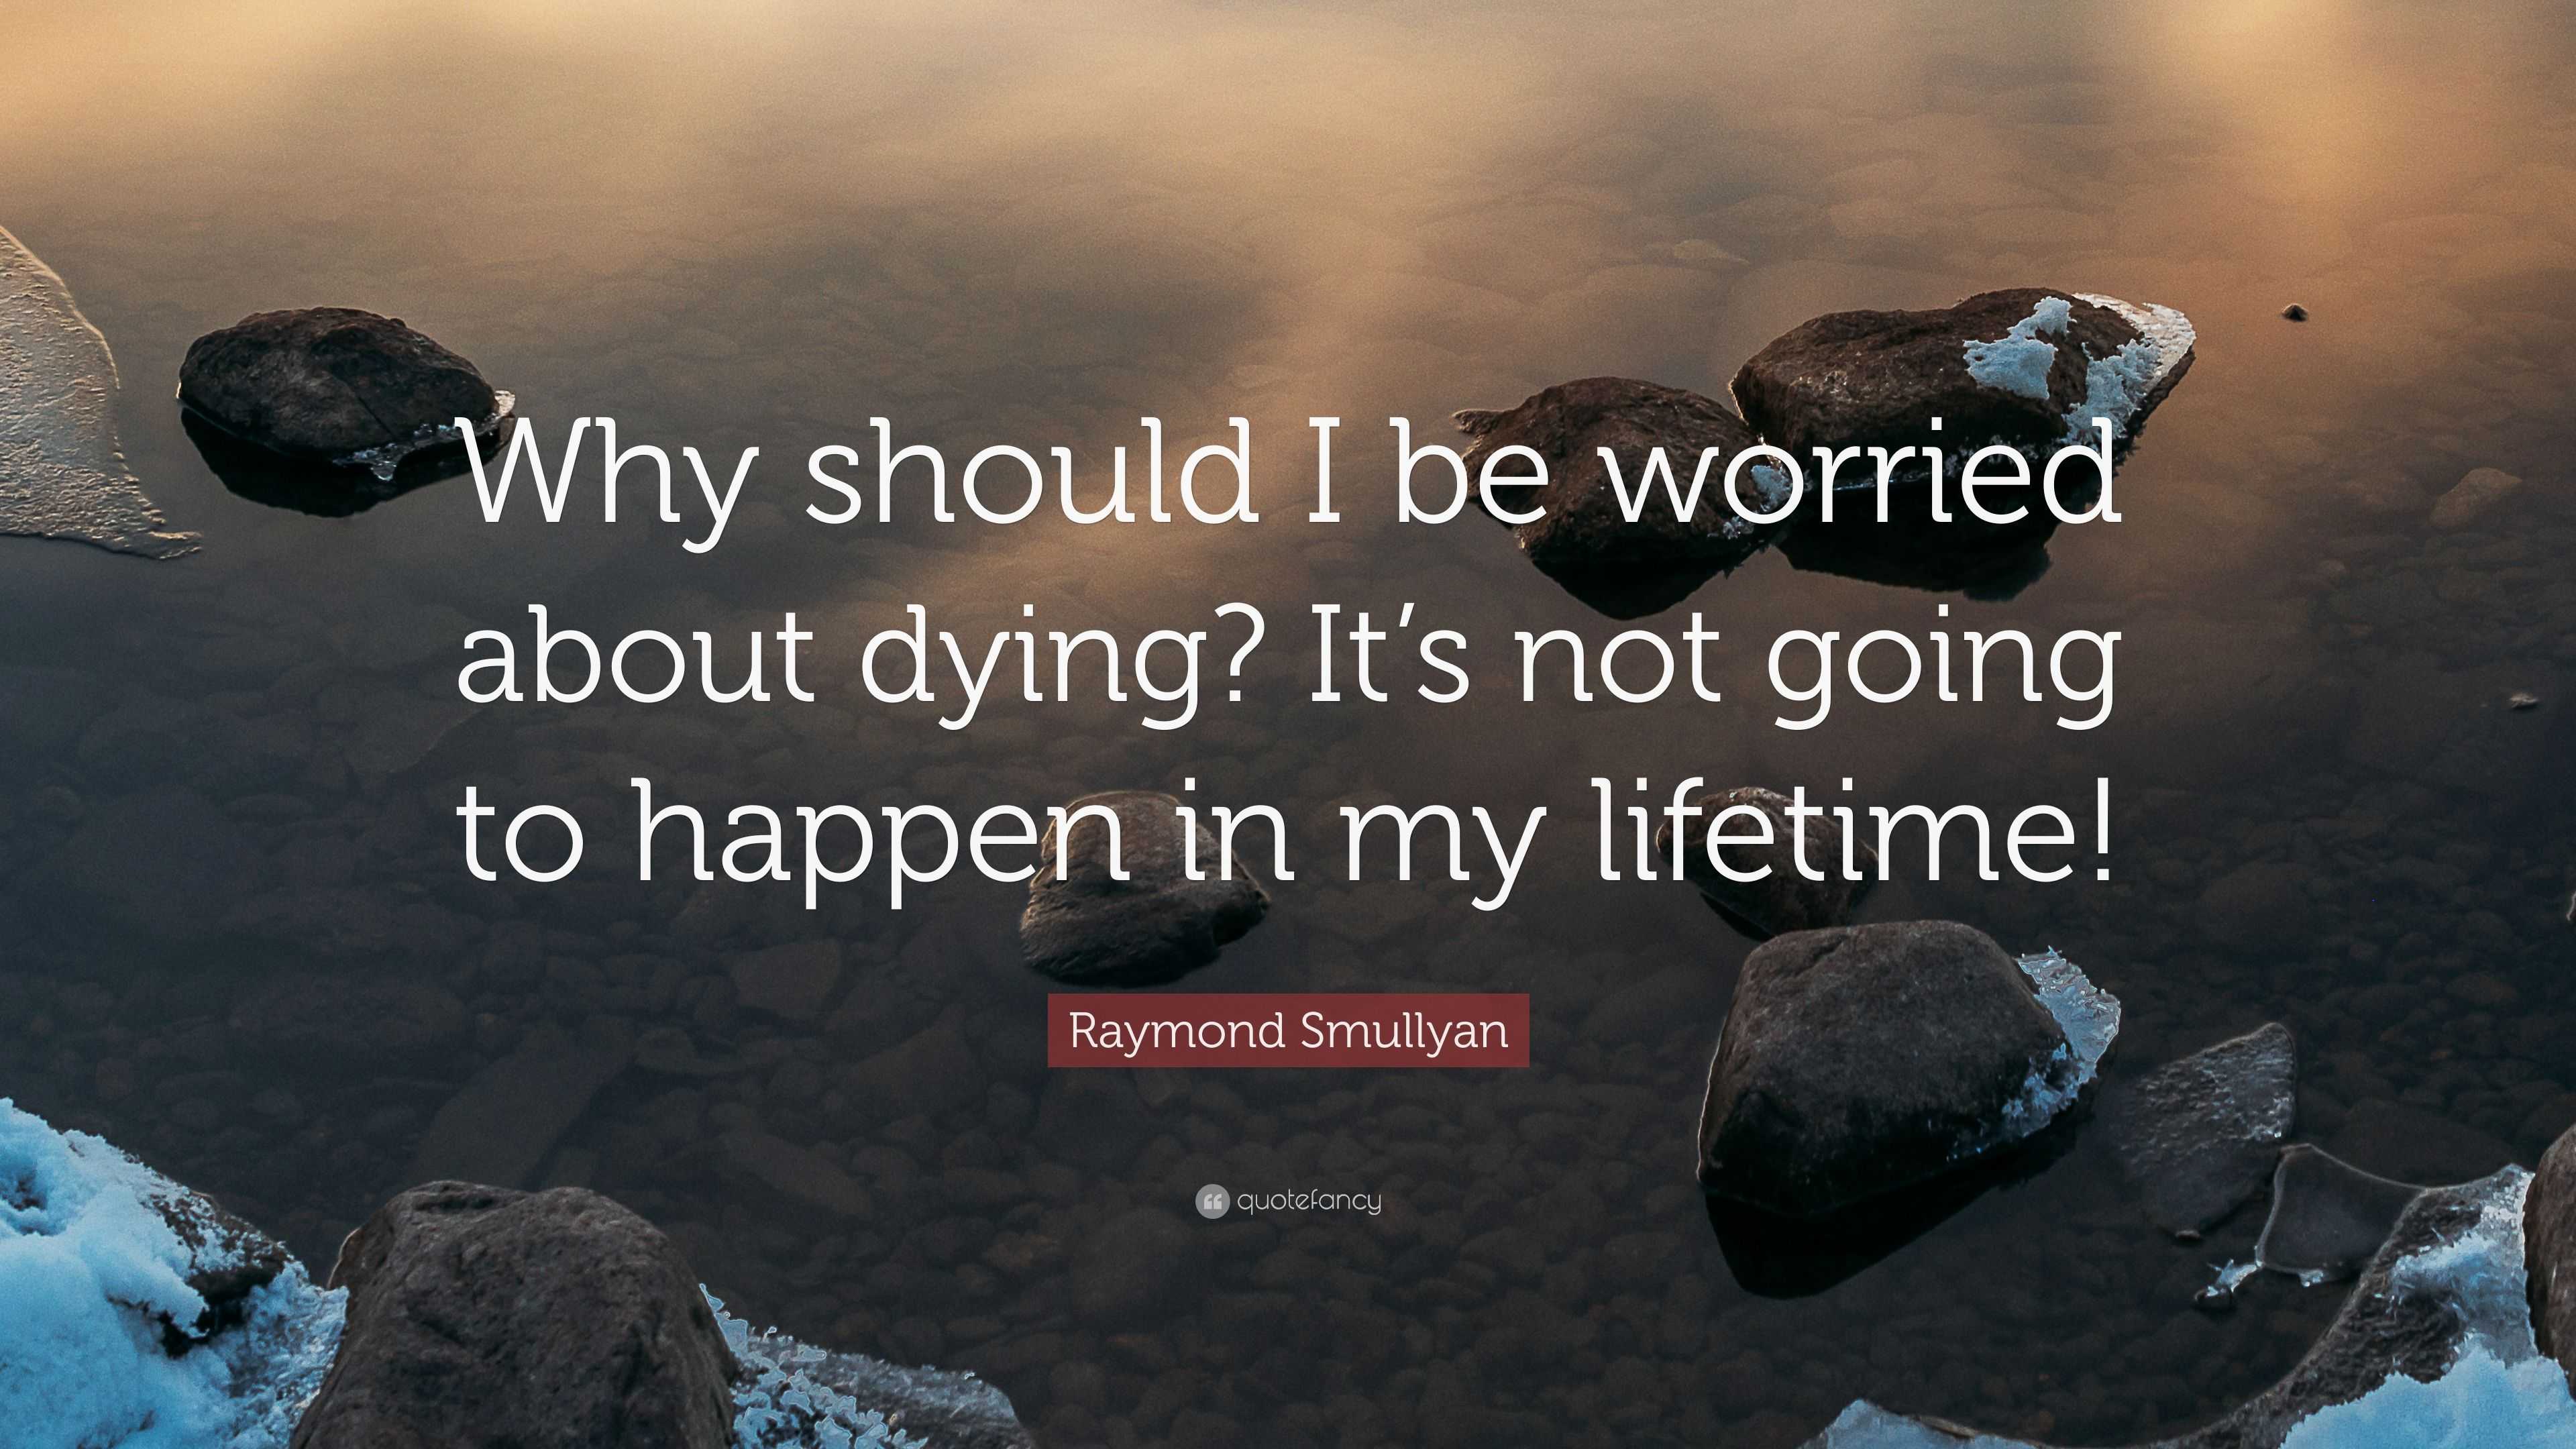 Raymond Smullyan Quote: “Why should I be worried about dying? It’s not ...